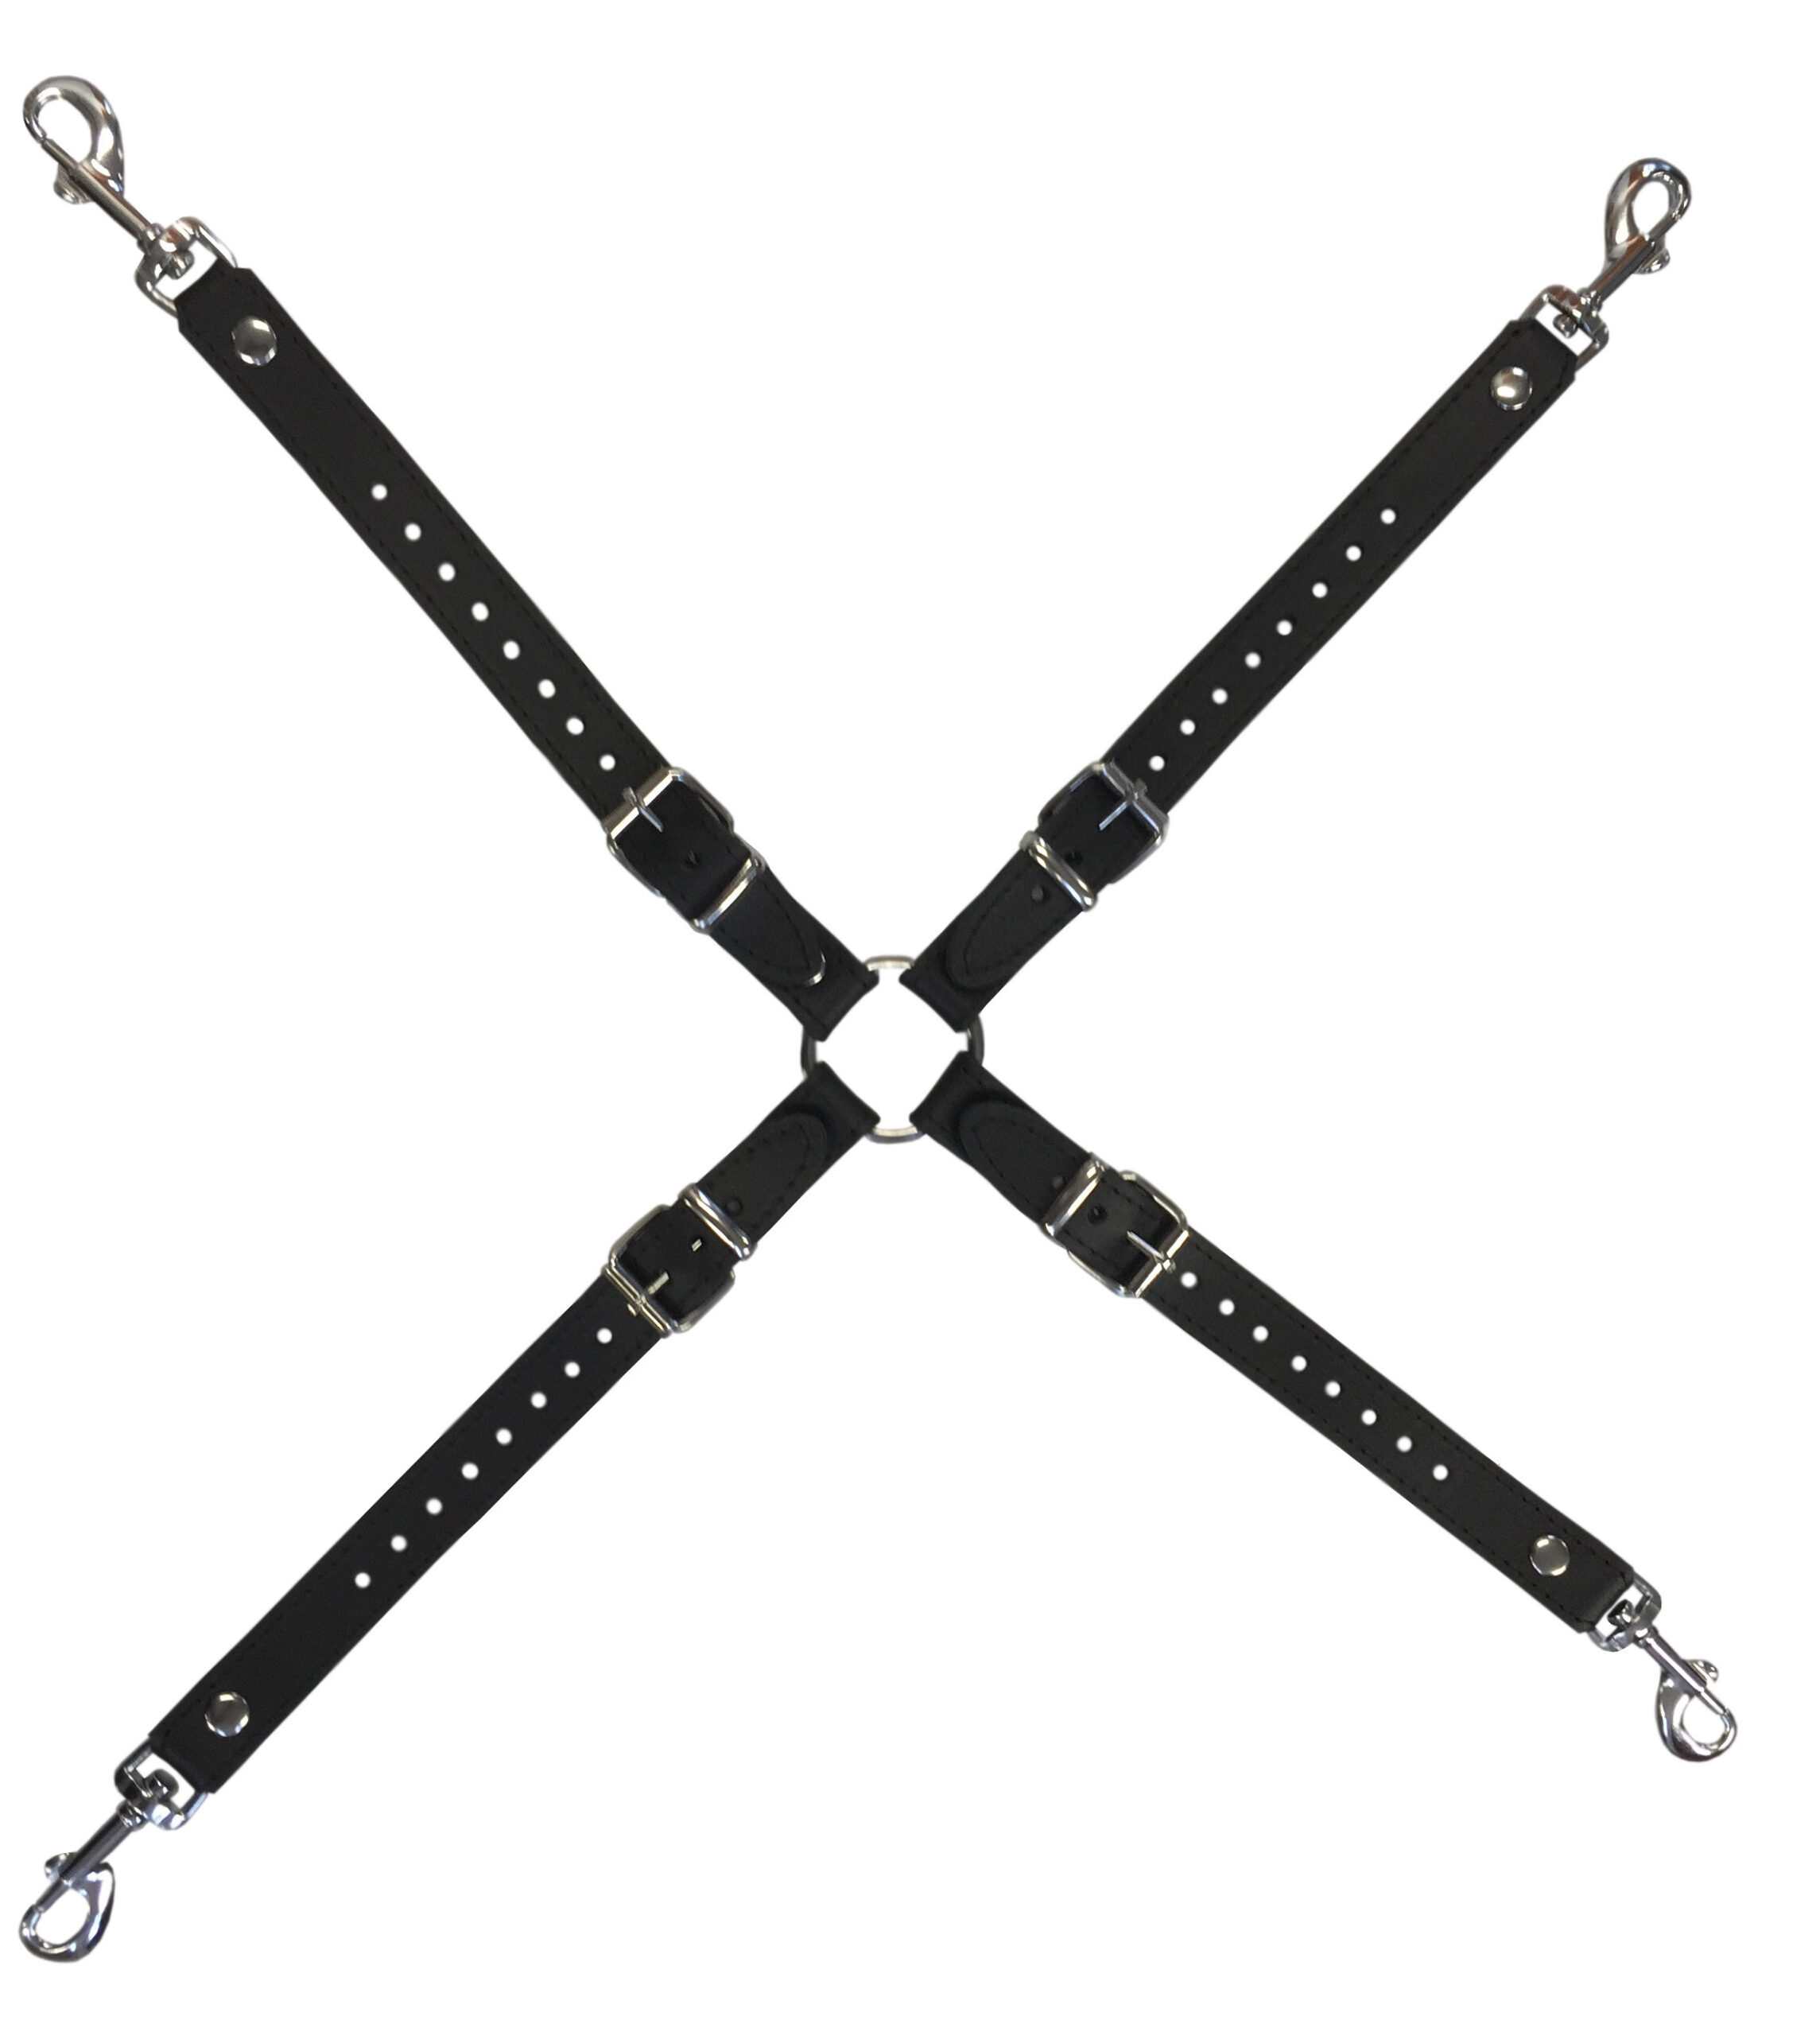 Universal connection strap with carabiner “Hogtie” adjustable